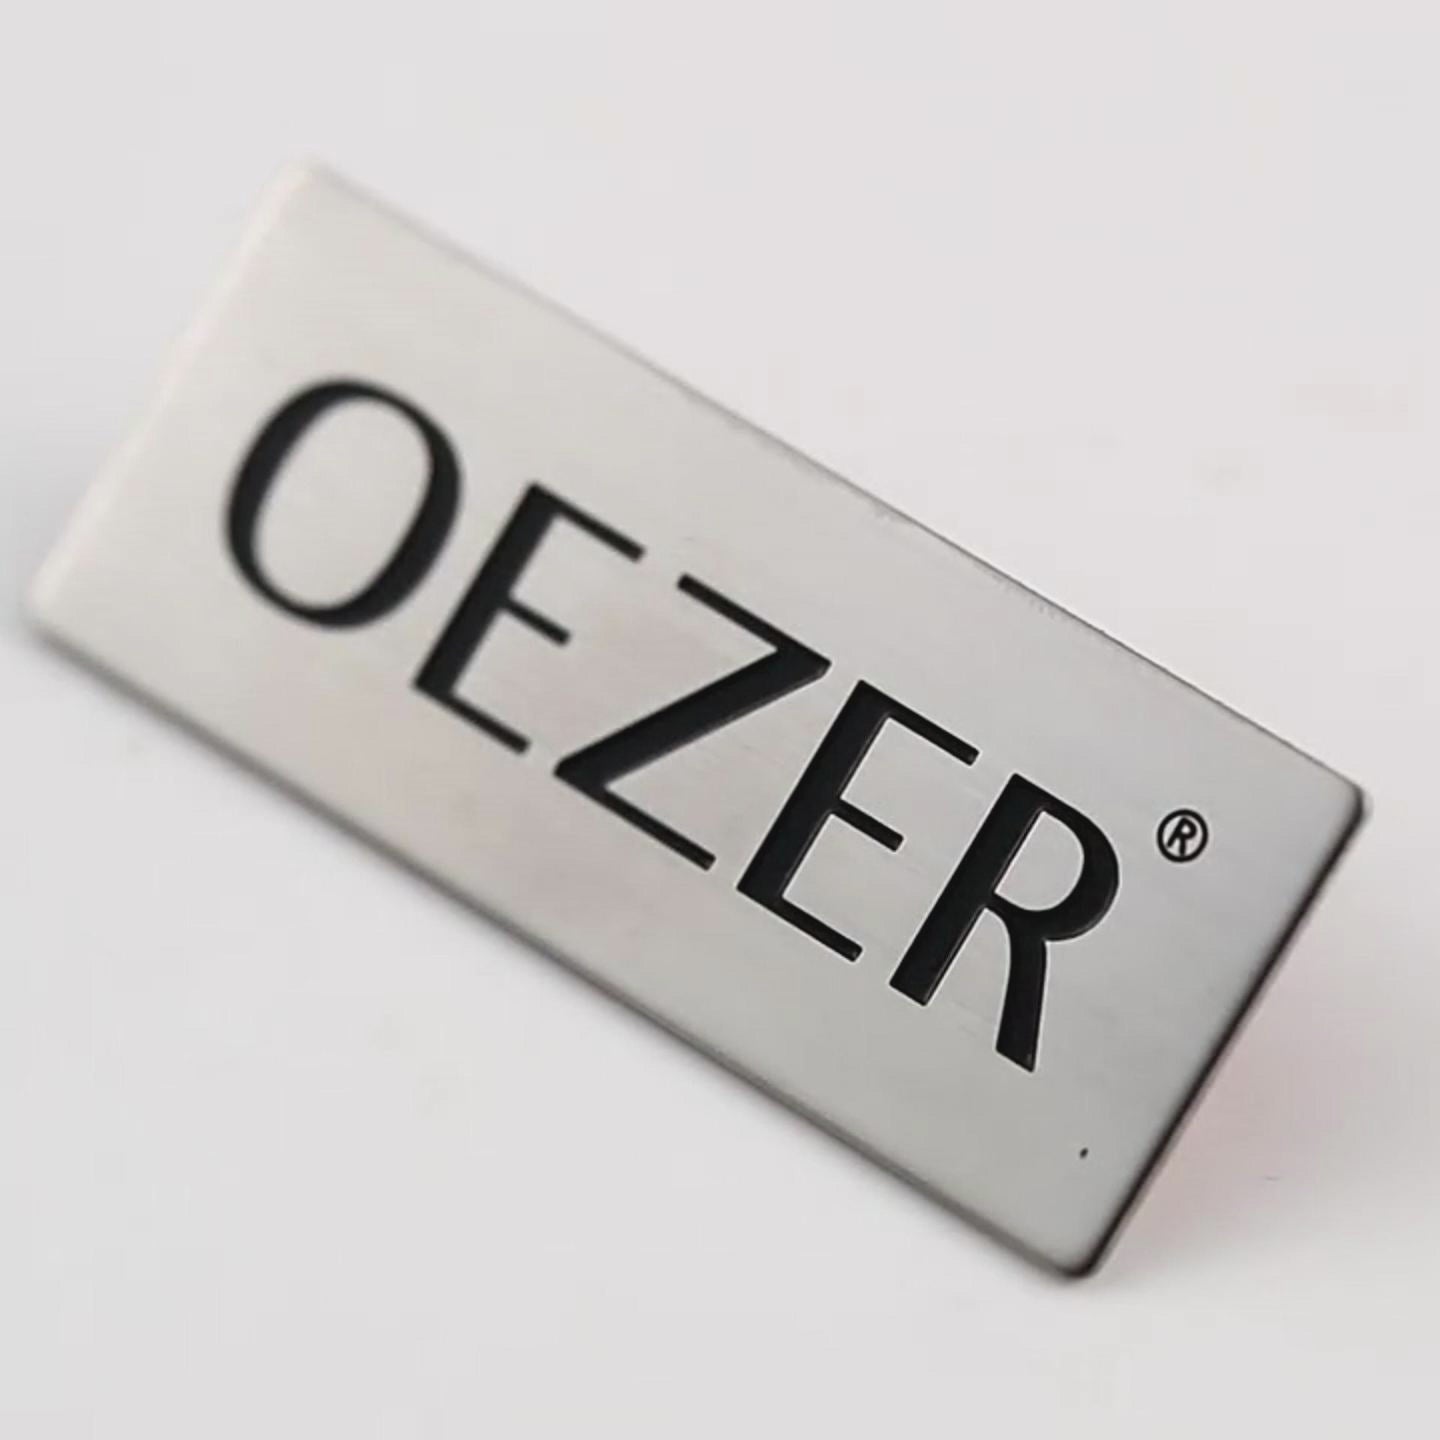 Custom Aluminum Name Tags featuring corporate logo for employee identification